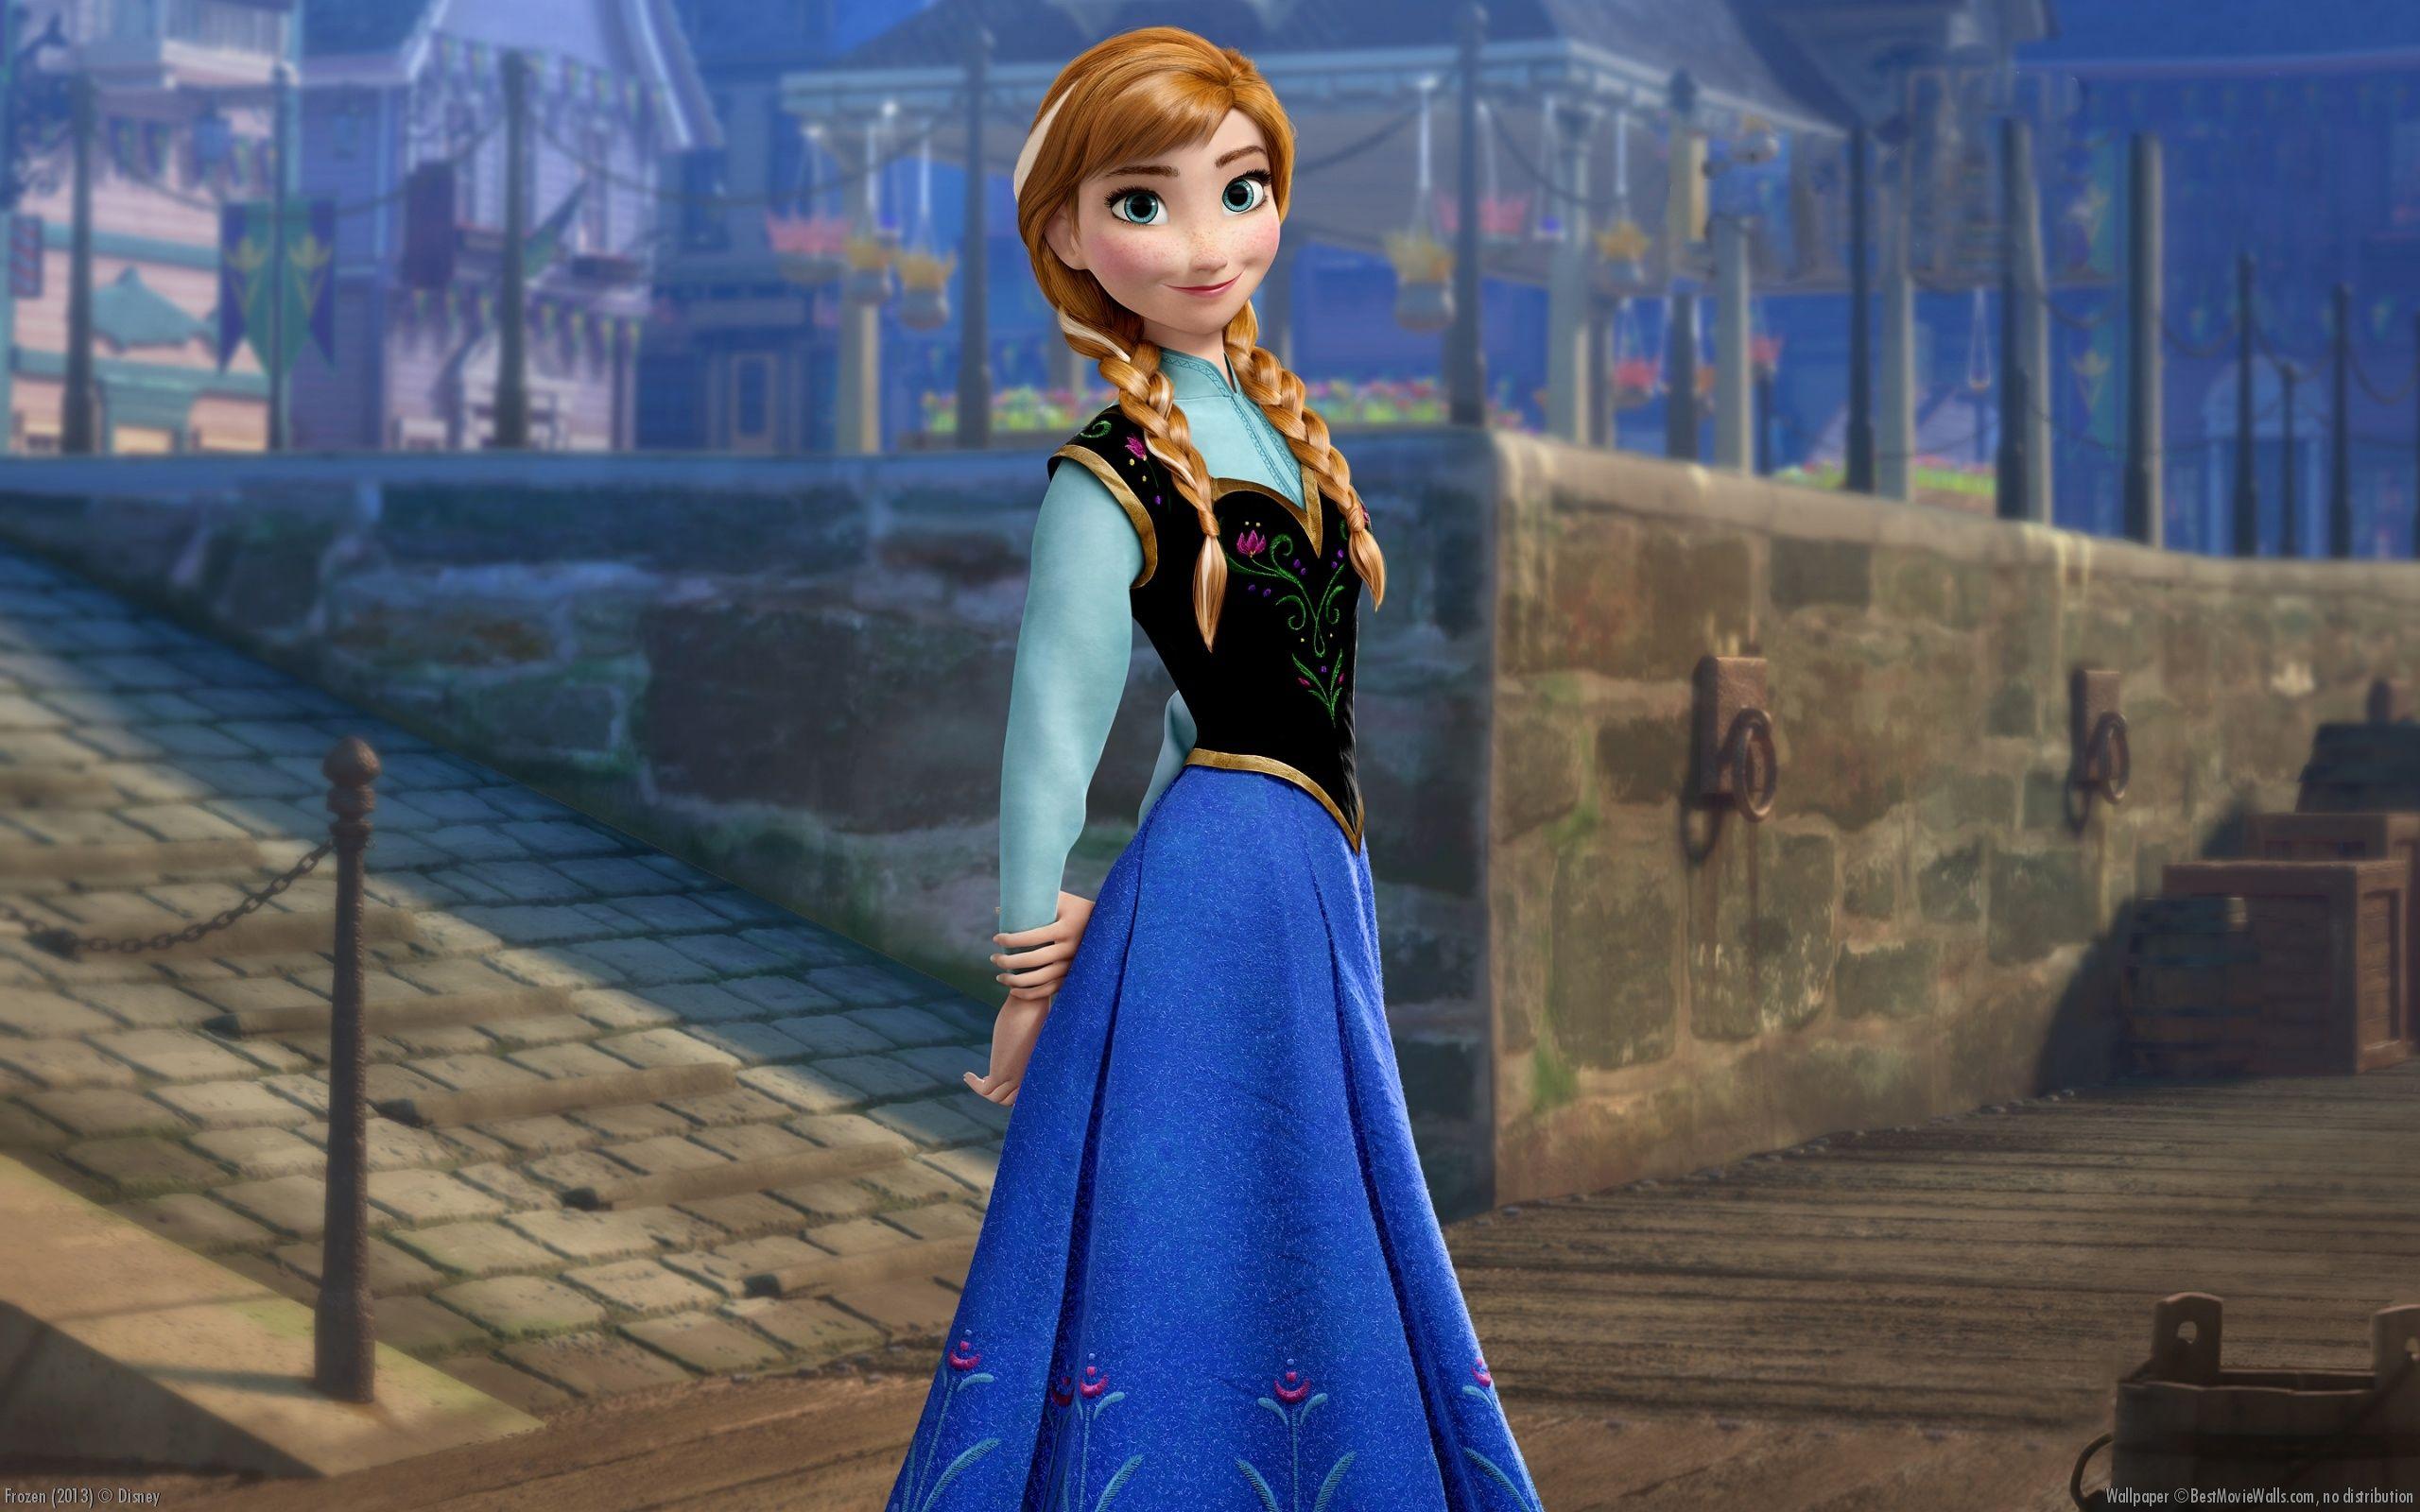 The Most Amazing & Best 'Frozen' Wallpaper On The Web